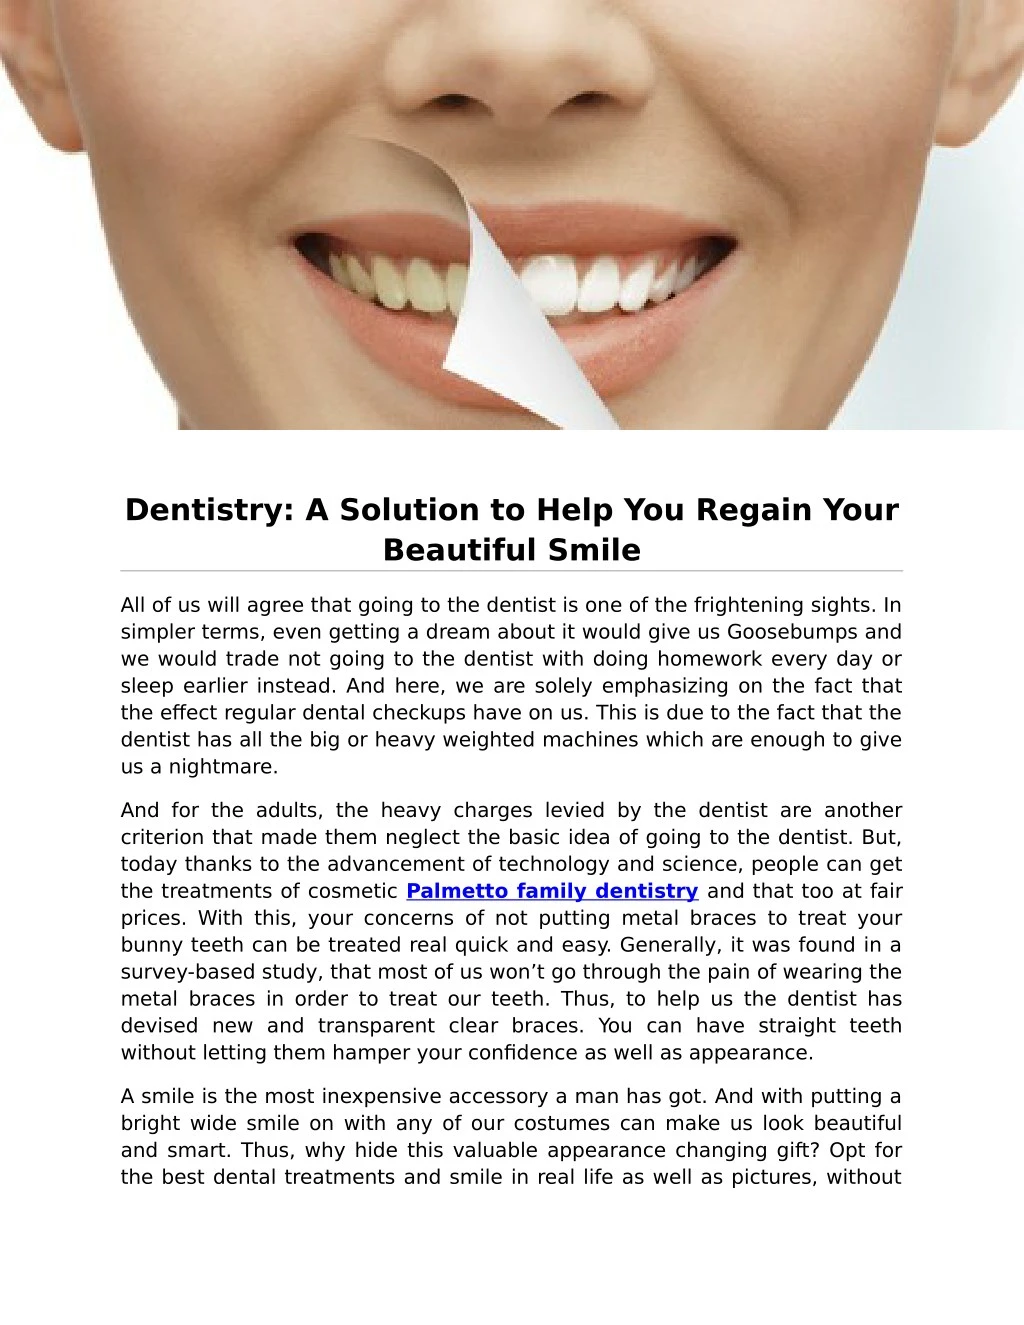 dentistry a solution to help you regain your